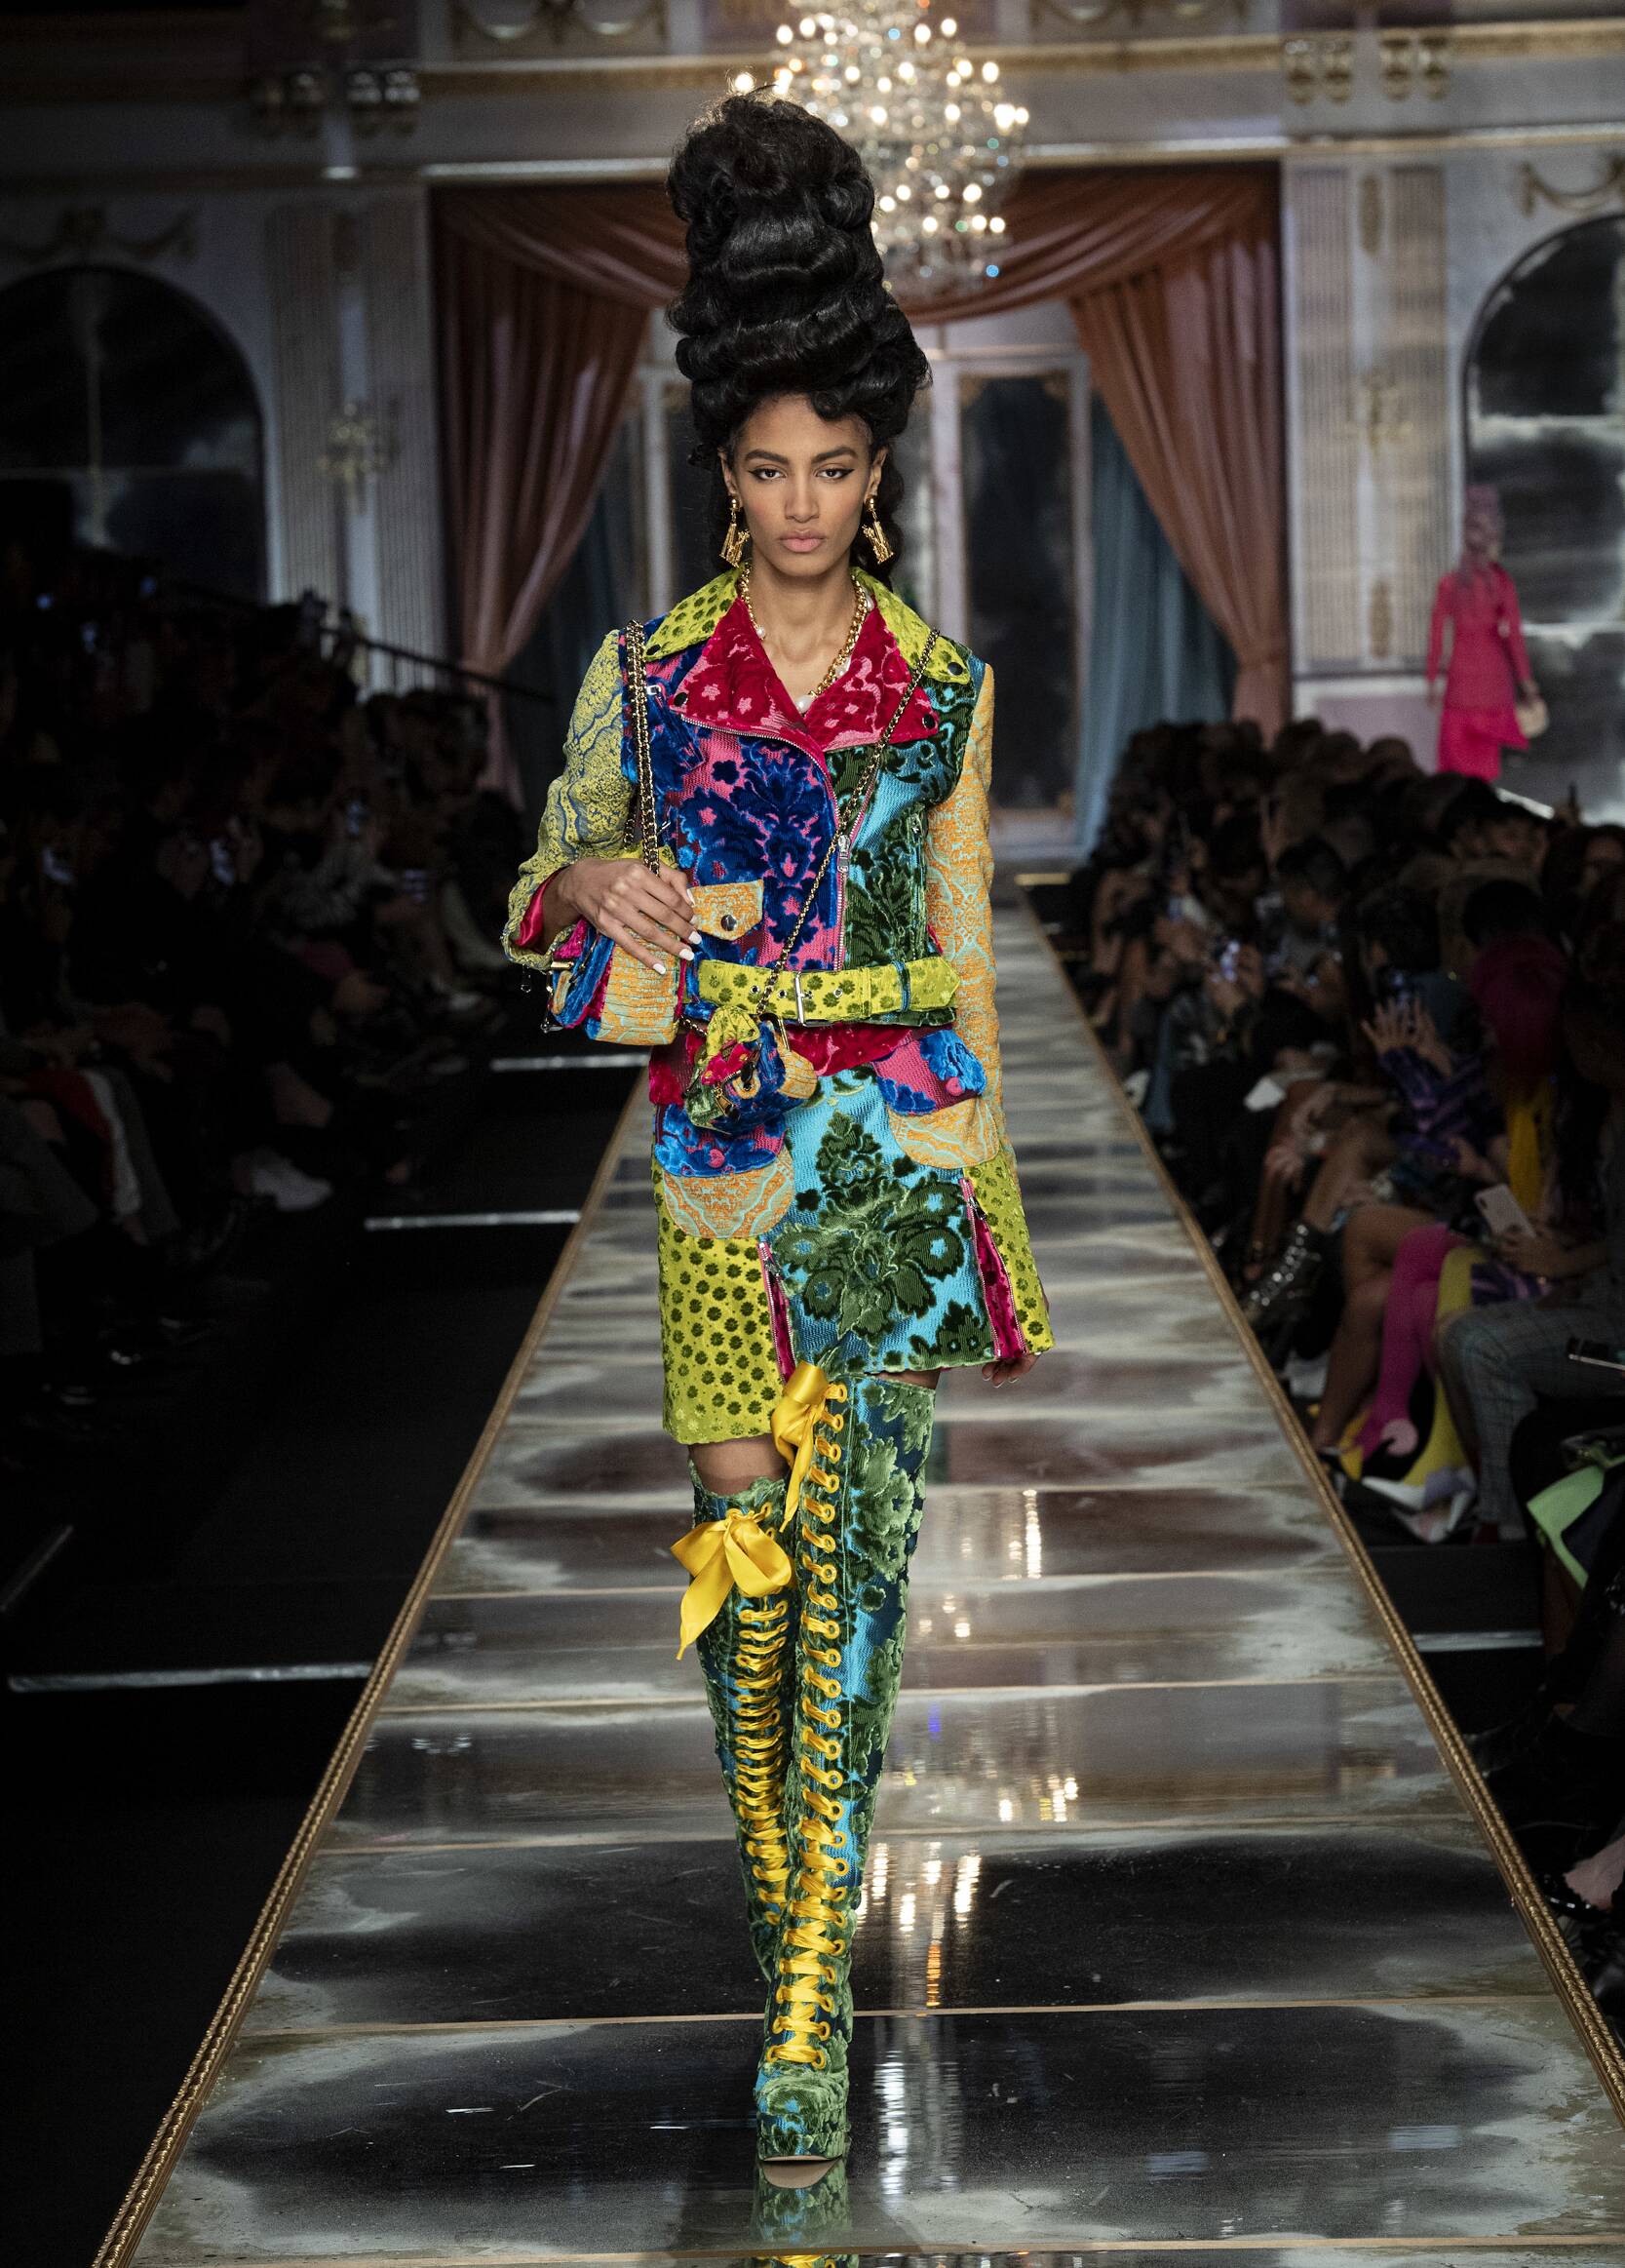 MOSCHINO FALL WINTER 2020 WOMEN’S COLLECTION | The Skinny Beep